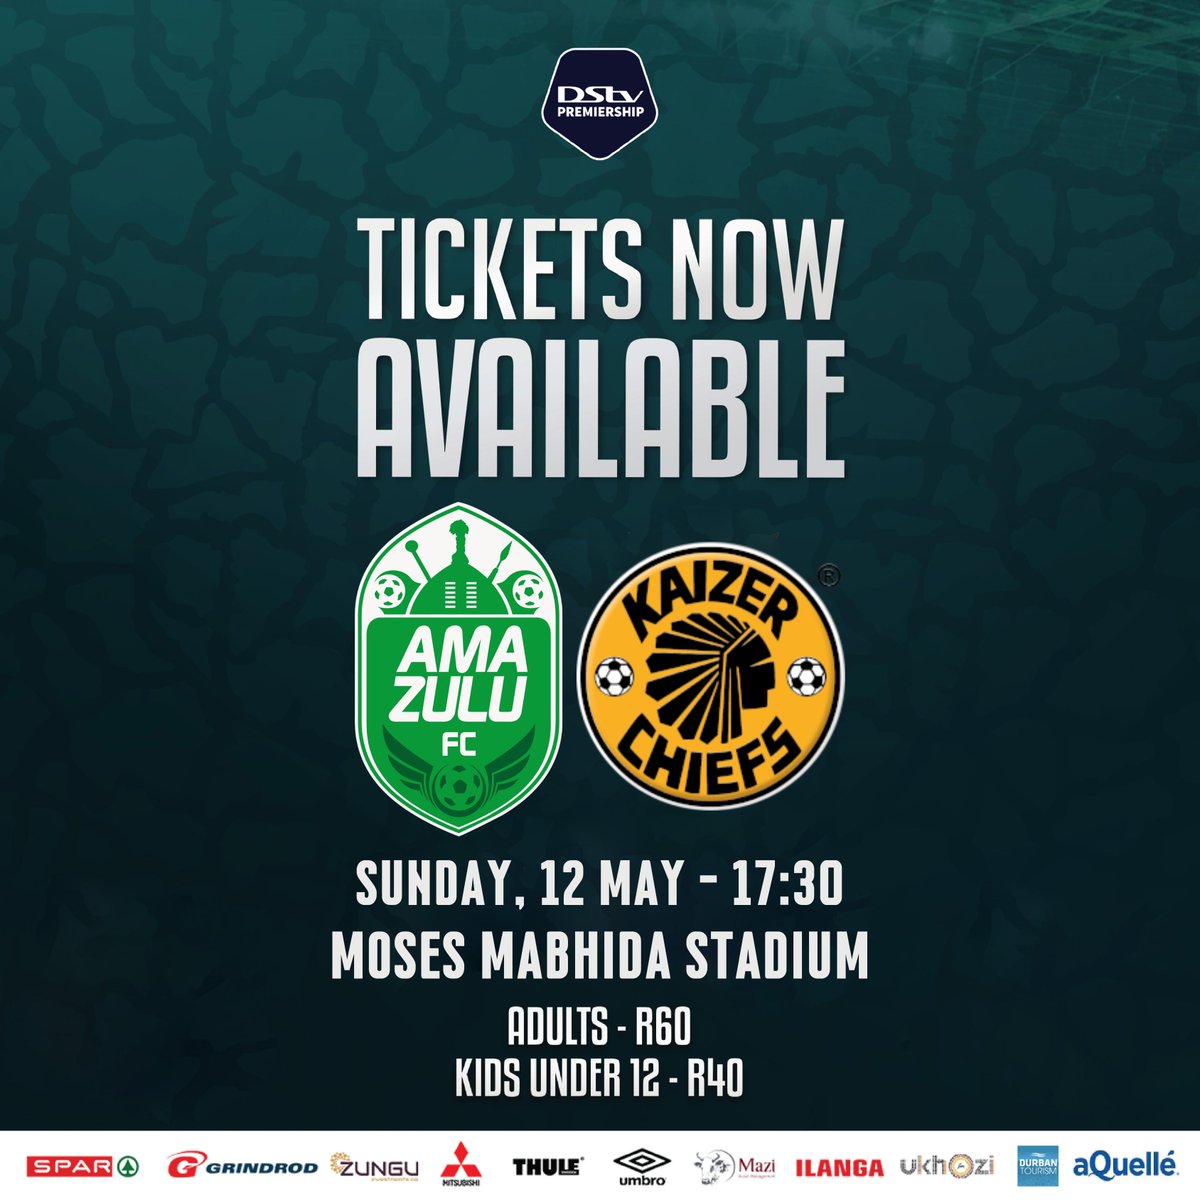 🟢 𝗧𝗜𝗖𝗞𝗘𝗧𝗦 𝗔𝗩𝗔𝗜𝗟𝗔𝗕𝗟𝗘 🎫 Get your tickets to our match against Kaizer Chiefs this Sunday, 12 May at Moses Mabhida Stadium. Join us at The Workshop at 1pm today to stand a chance to win tickets as well as other cool prizes. #Indlulamithi #HebeUsuthu